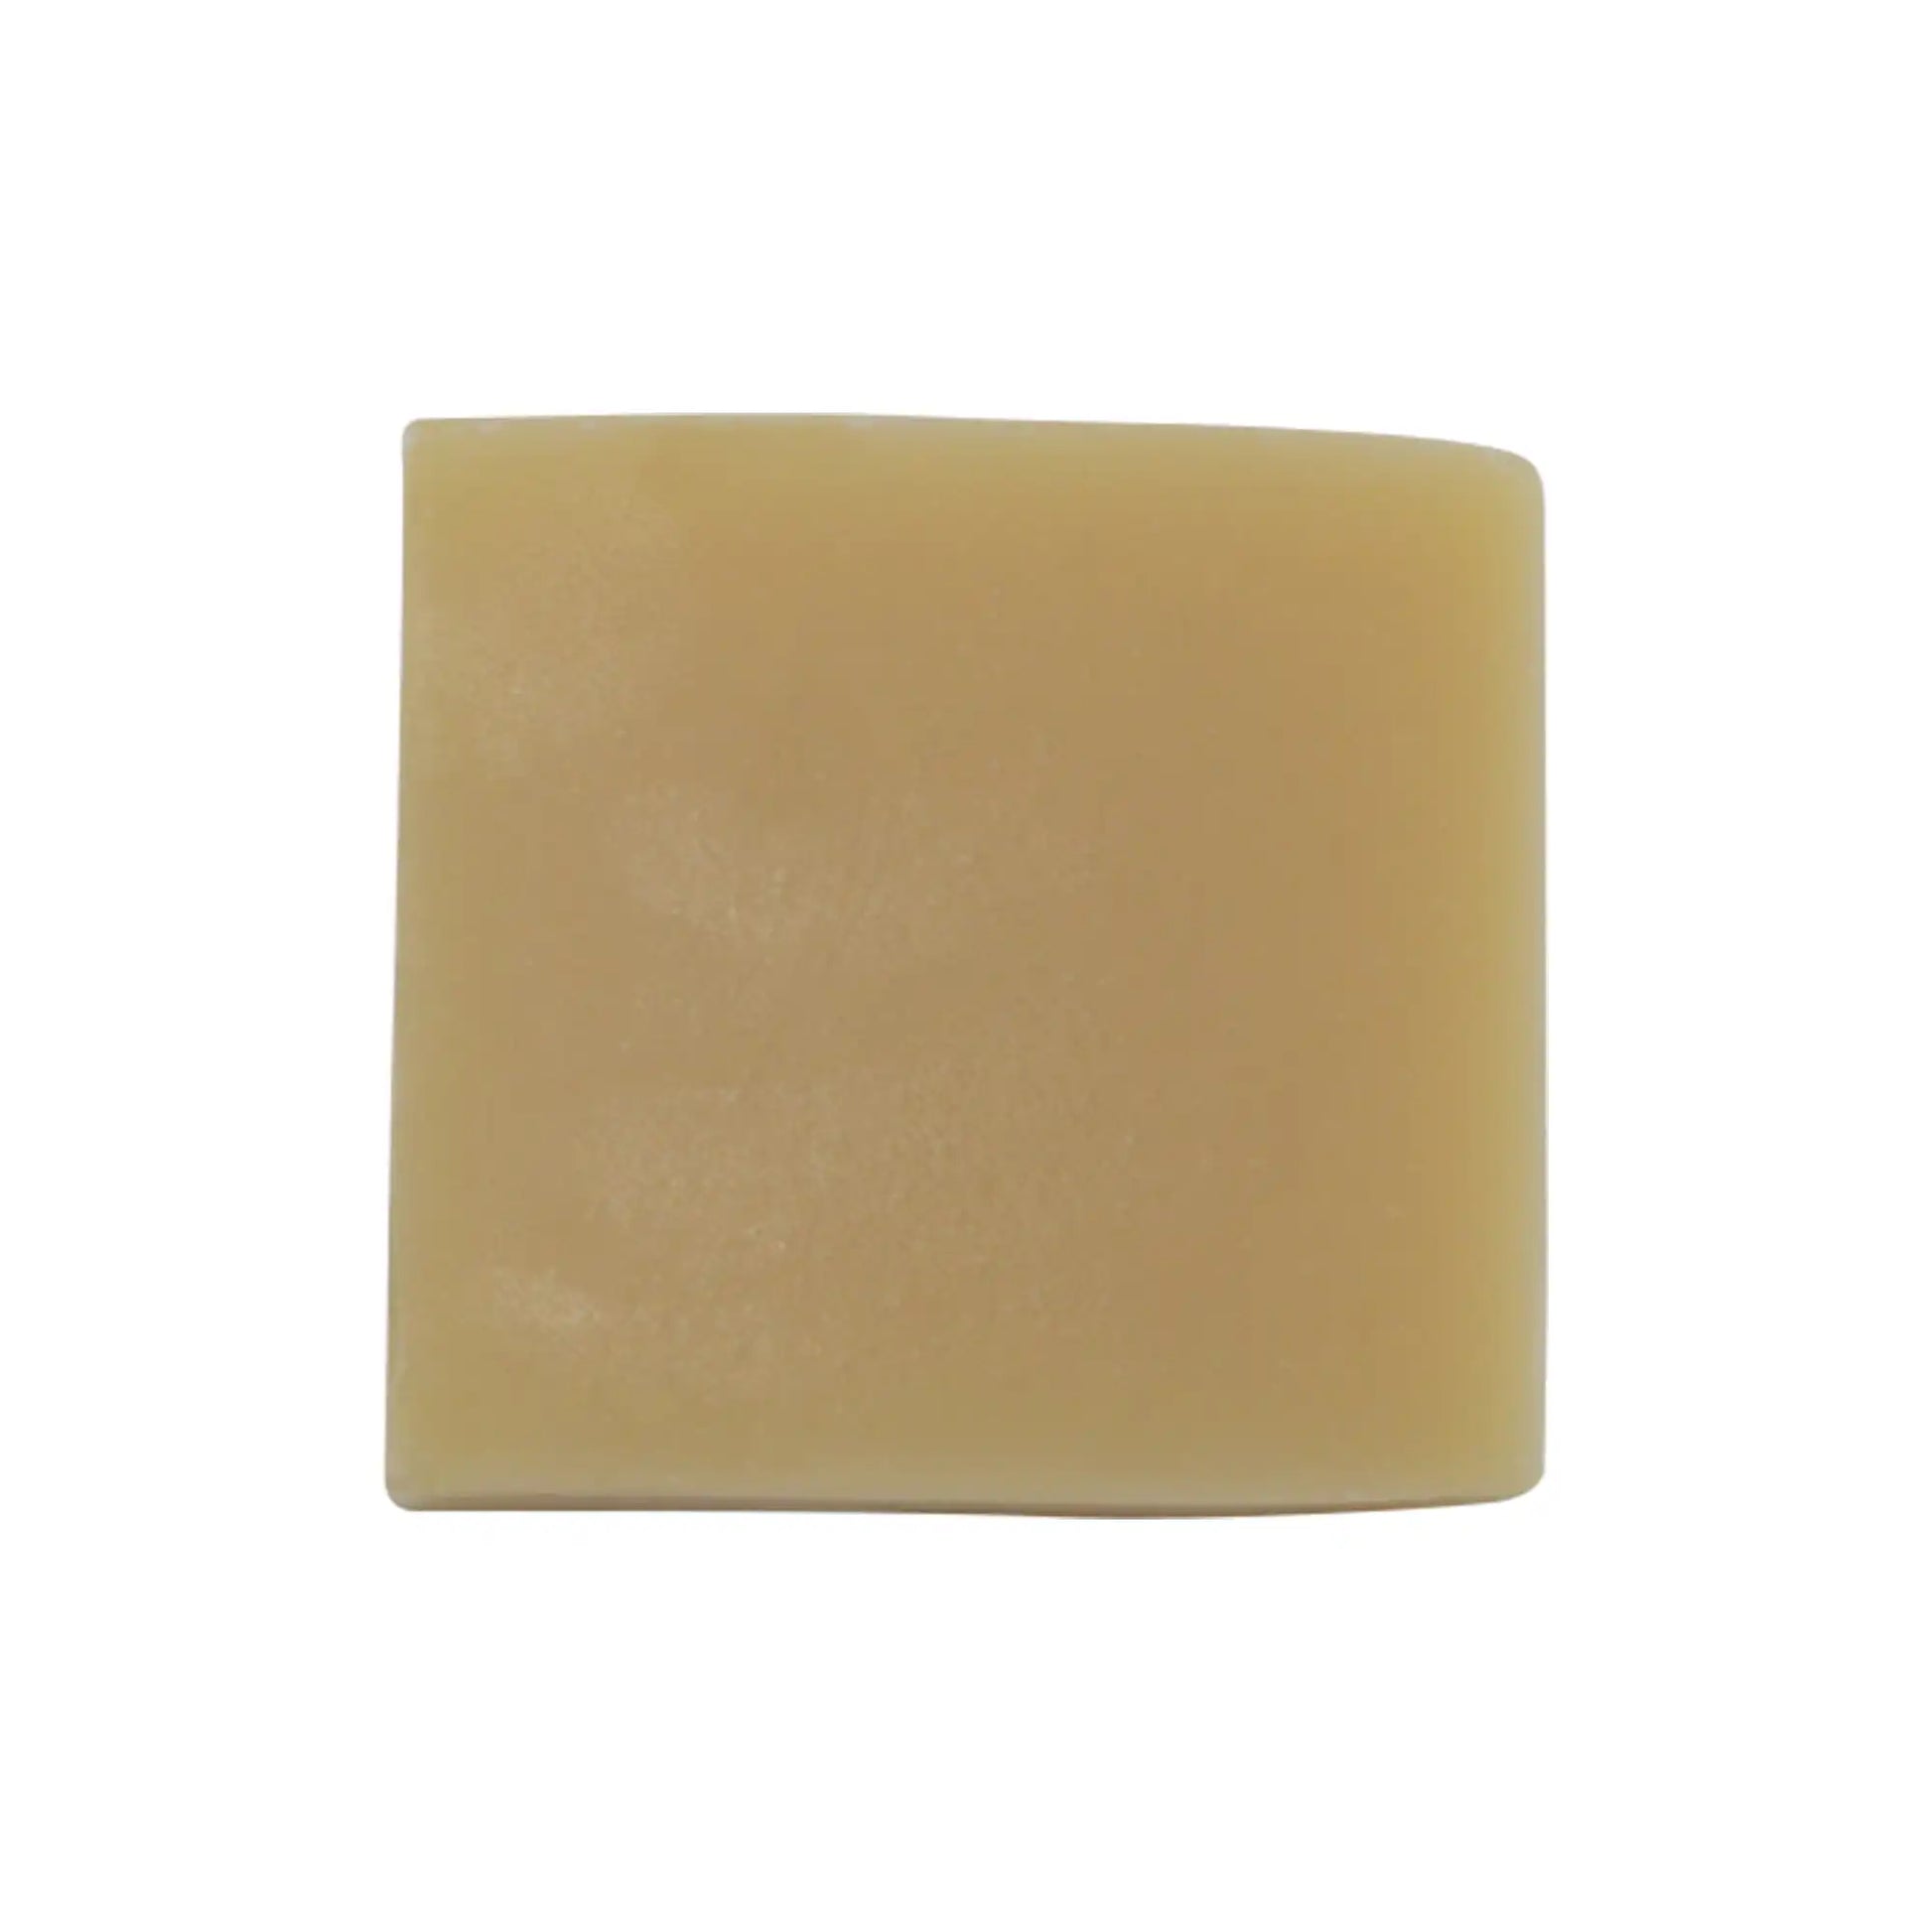 A bar of tea tree soap for acne